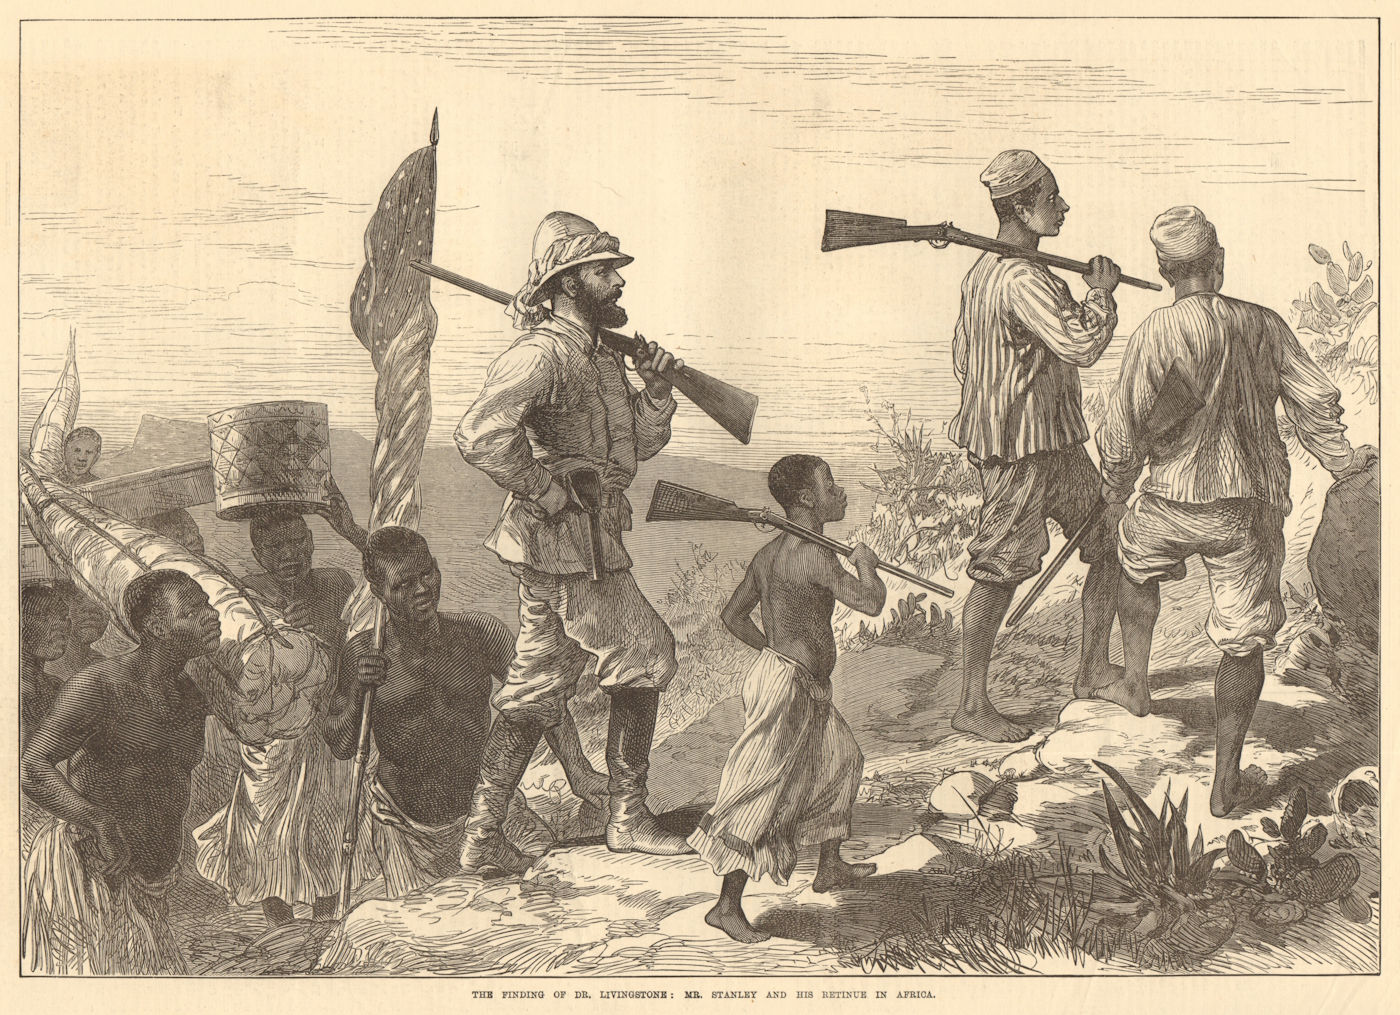 Associate Product Finding Dr. Livingstone: Mr Stanley & his retinue. Africa Explorers 1872 print